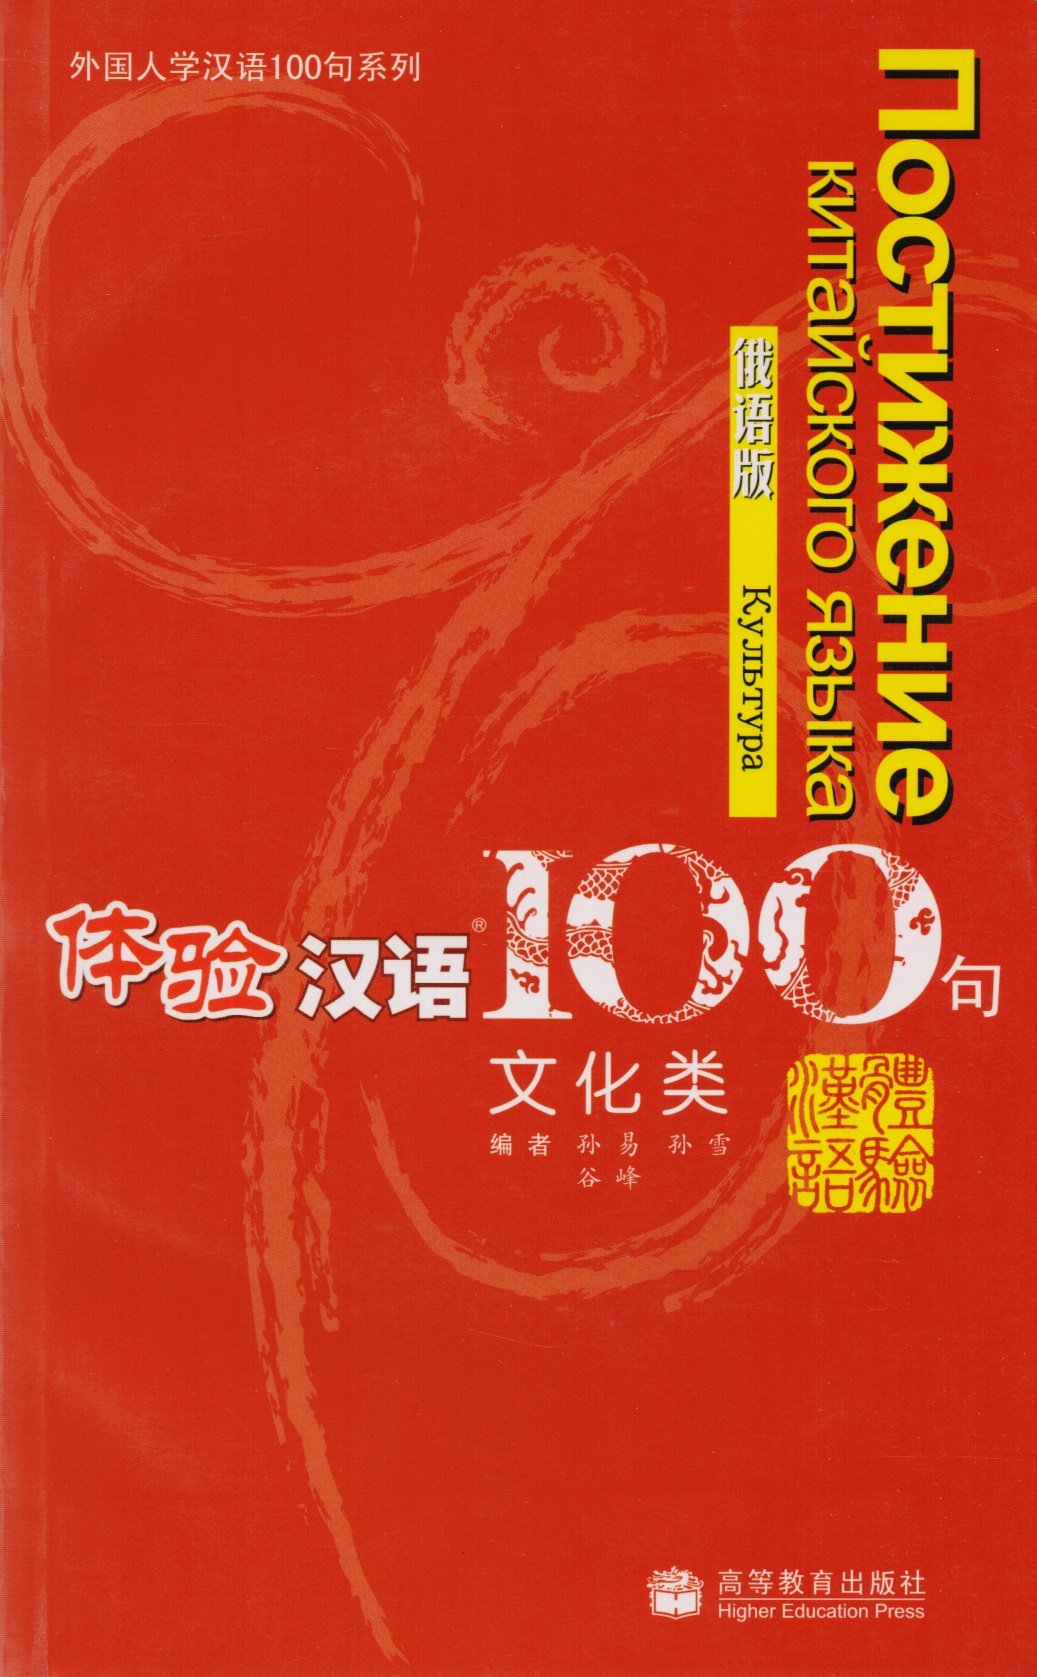 Experiencing Chinese 100: Cultural Communication (+CD) / 100     .  (+CD)